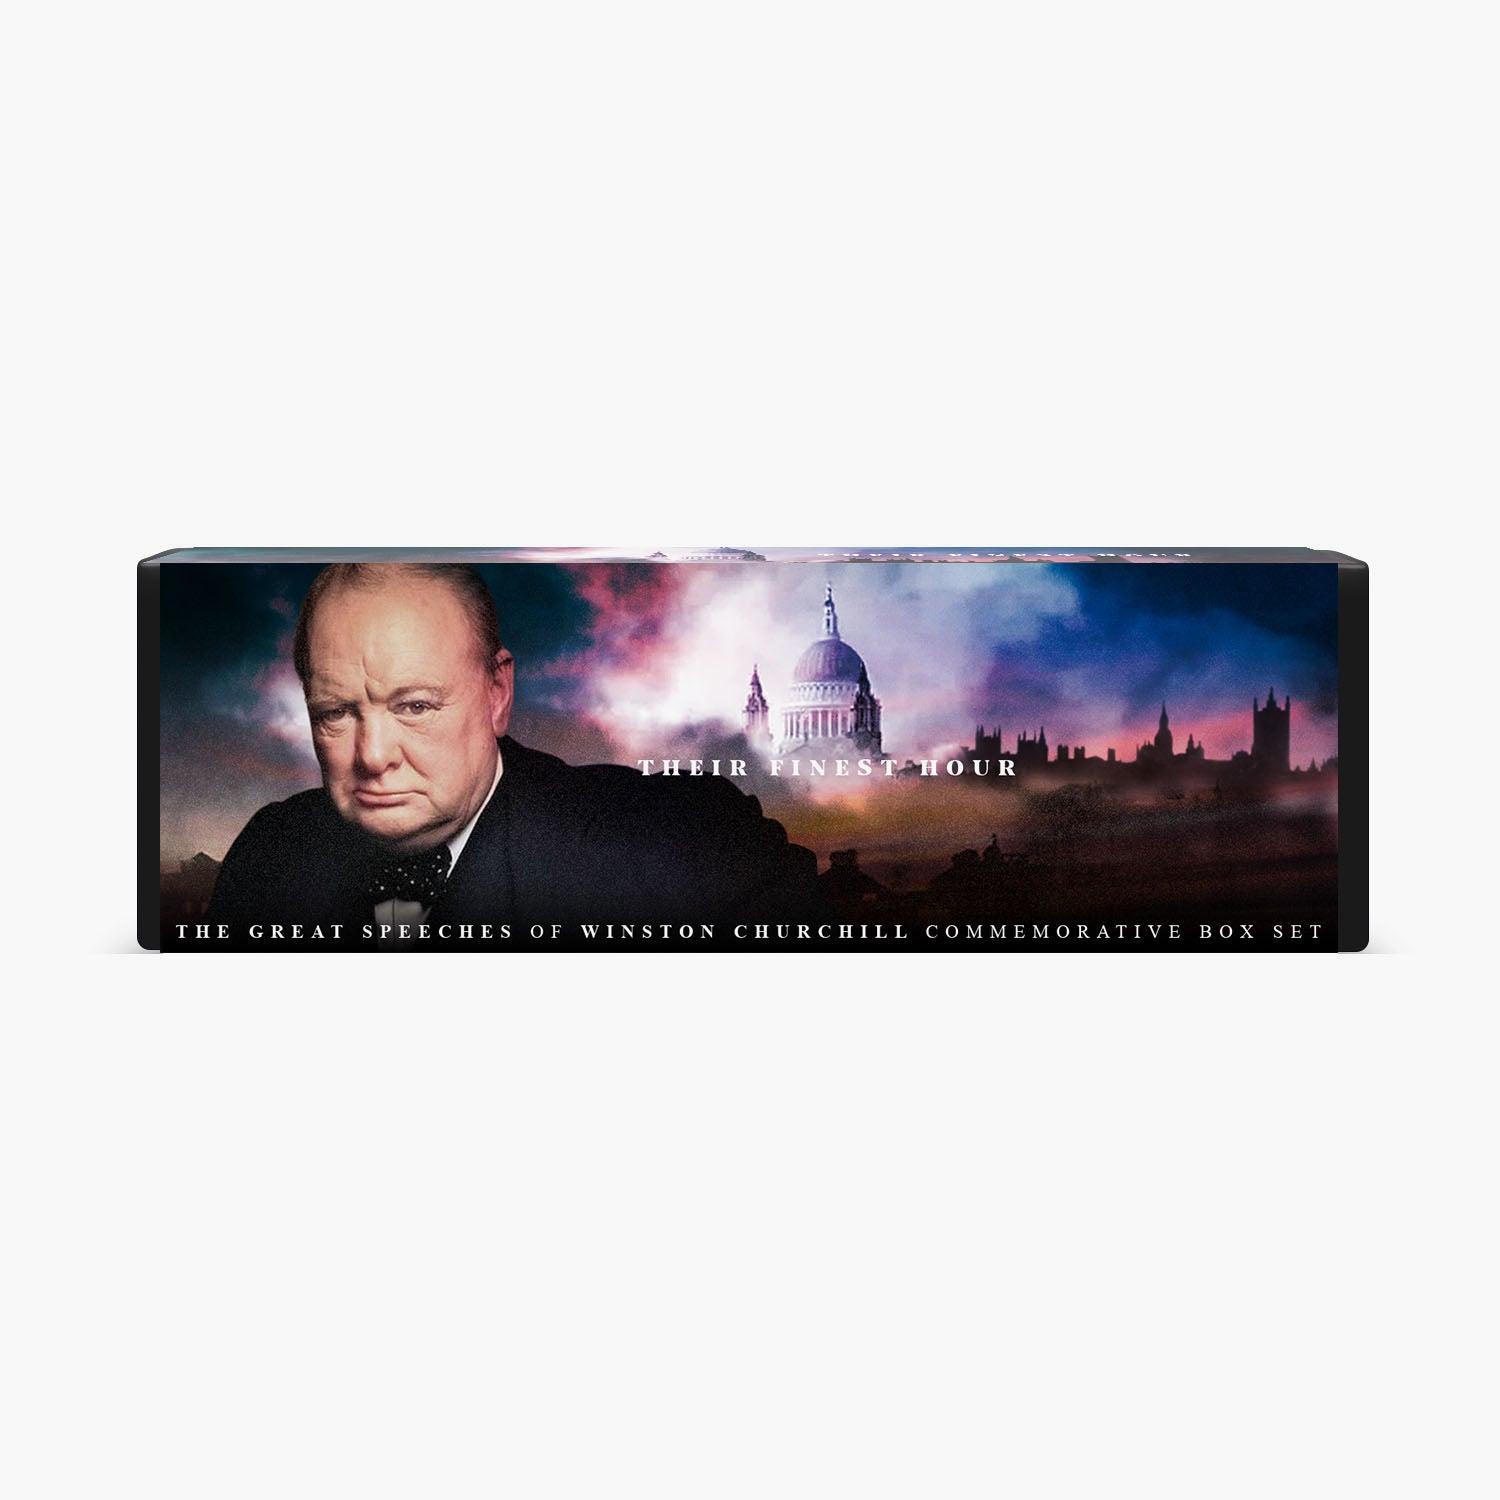 The Great Speeches of Winston Churchill First Edition Box Set